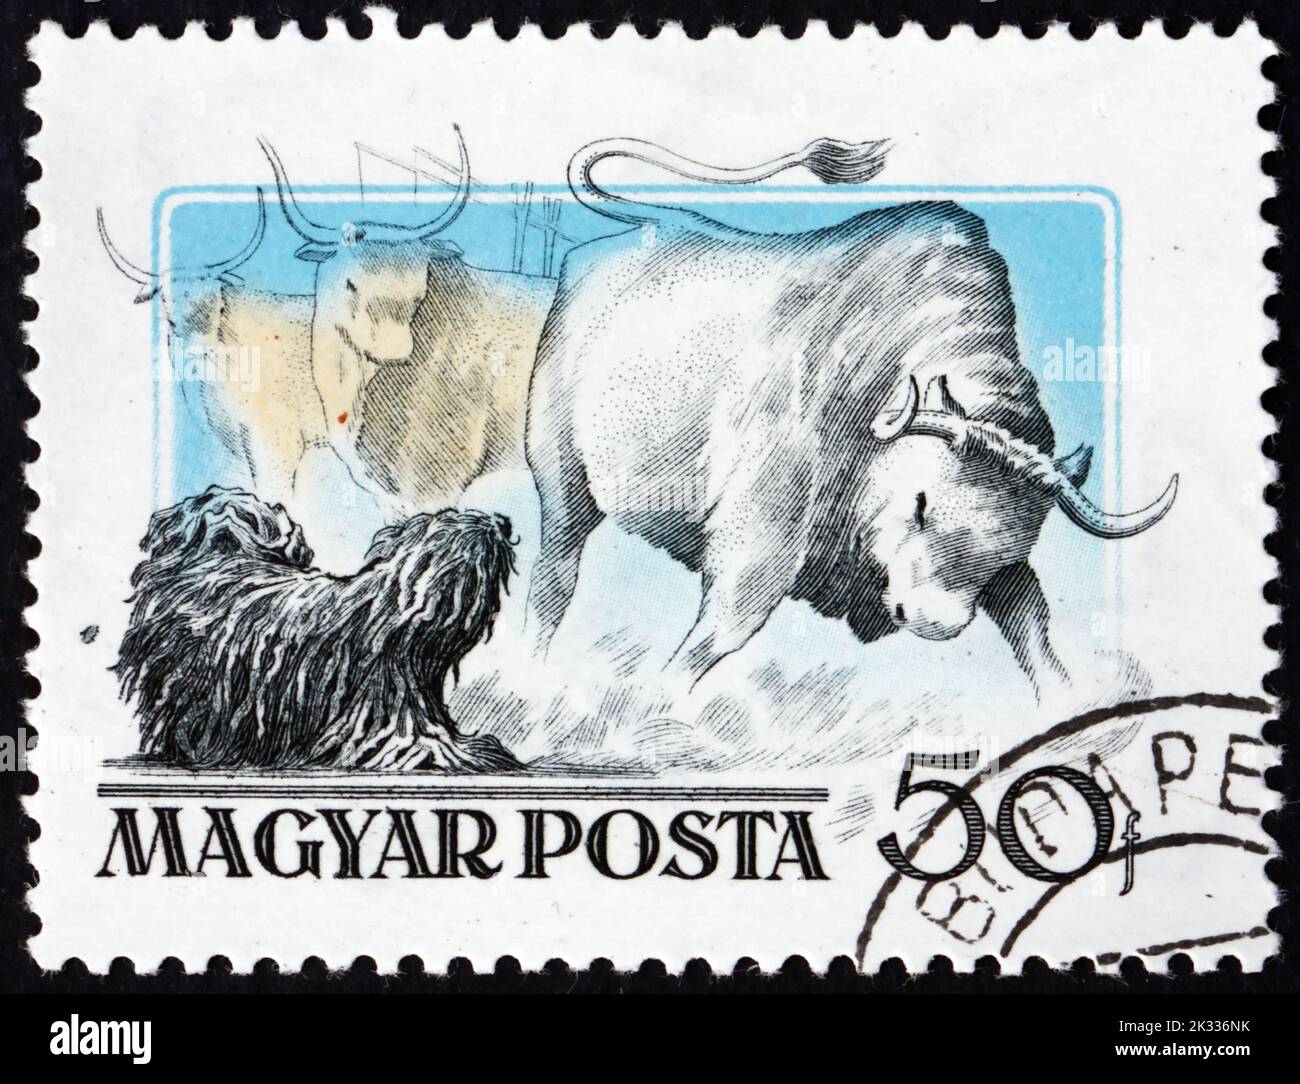 HUNGARY - CIRCA 1956: a stamp printed in Hungary shows puli and steer, puli is a breed of Hungarian herding and livestock guarding dog known for its l Stock Photo